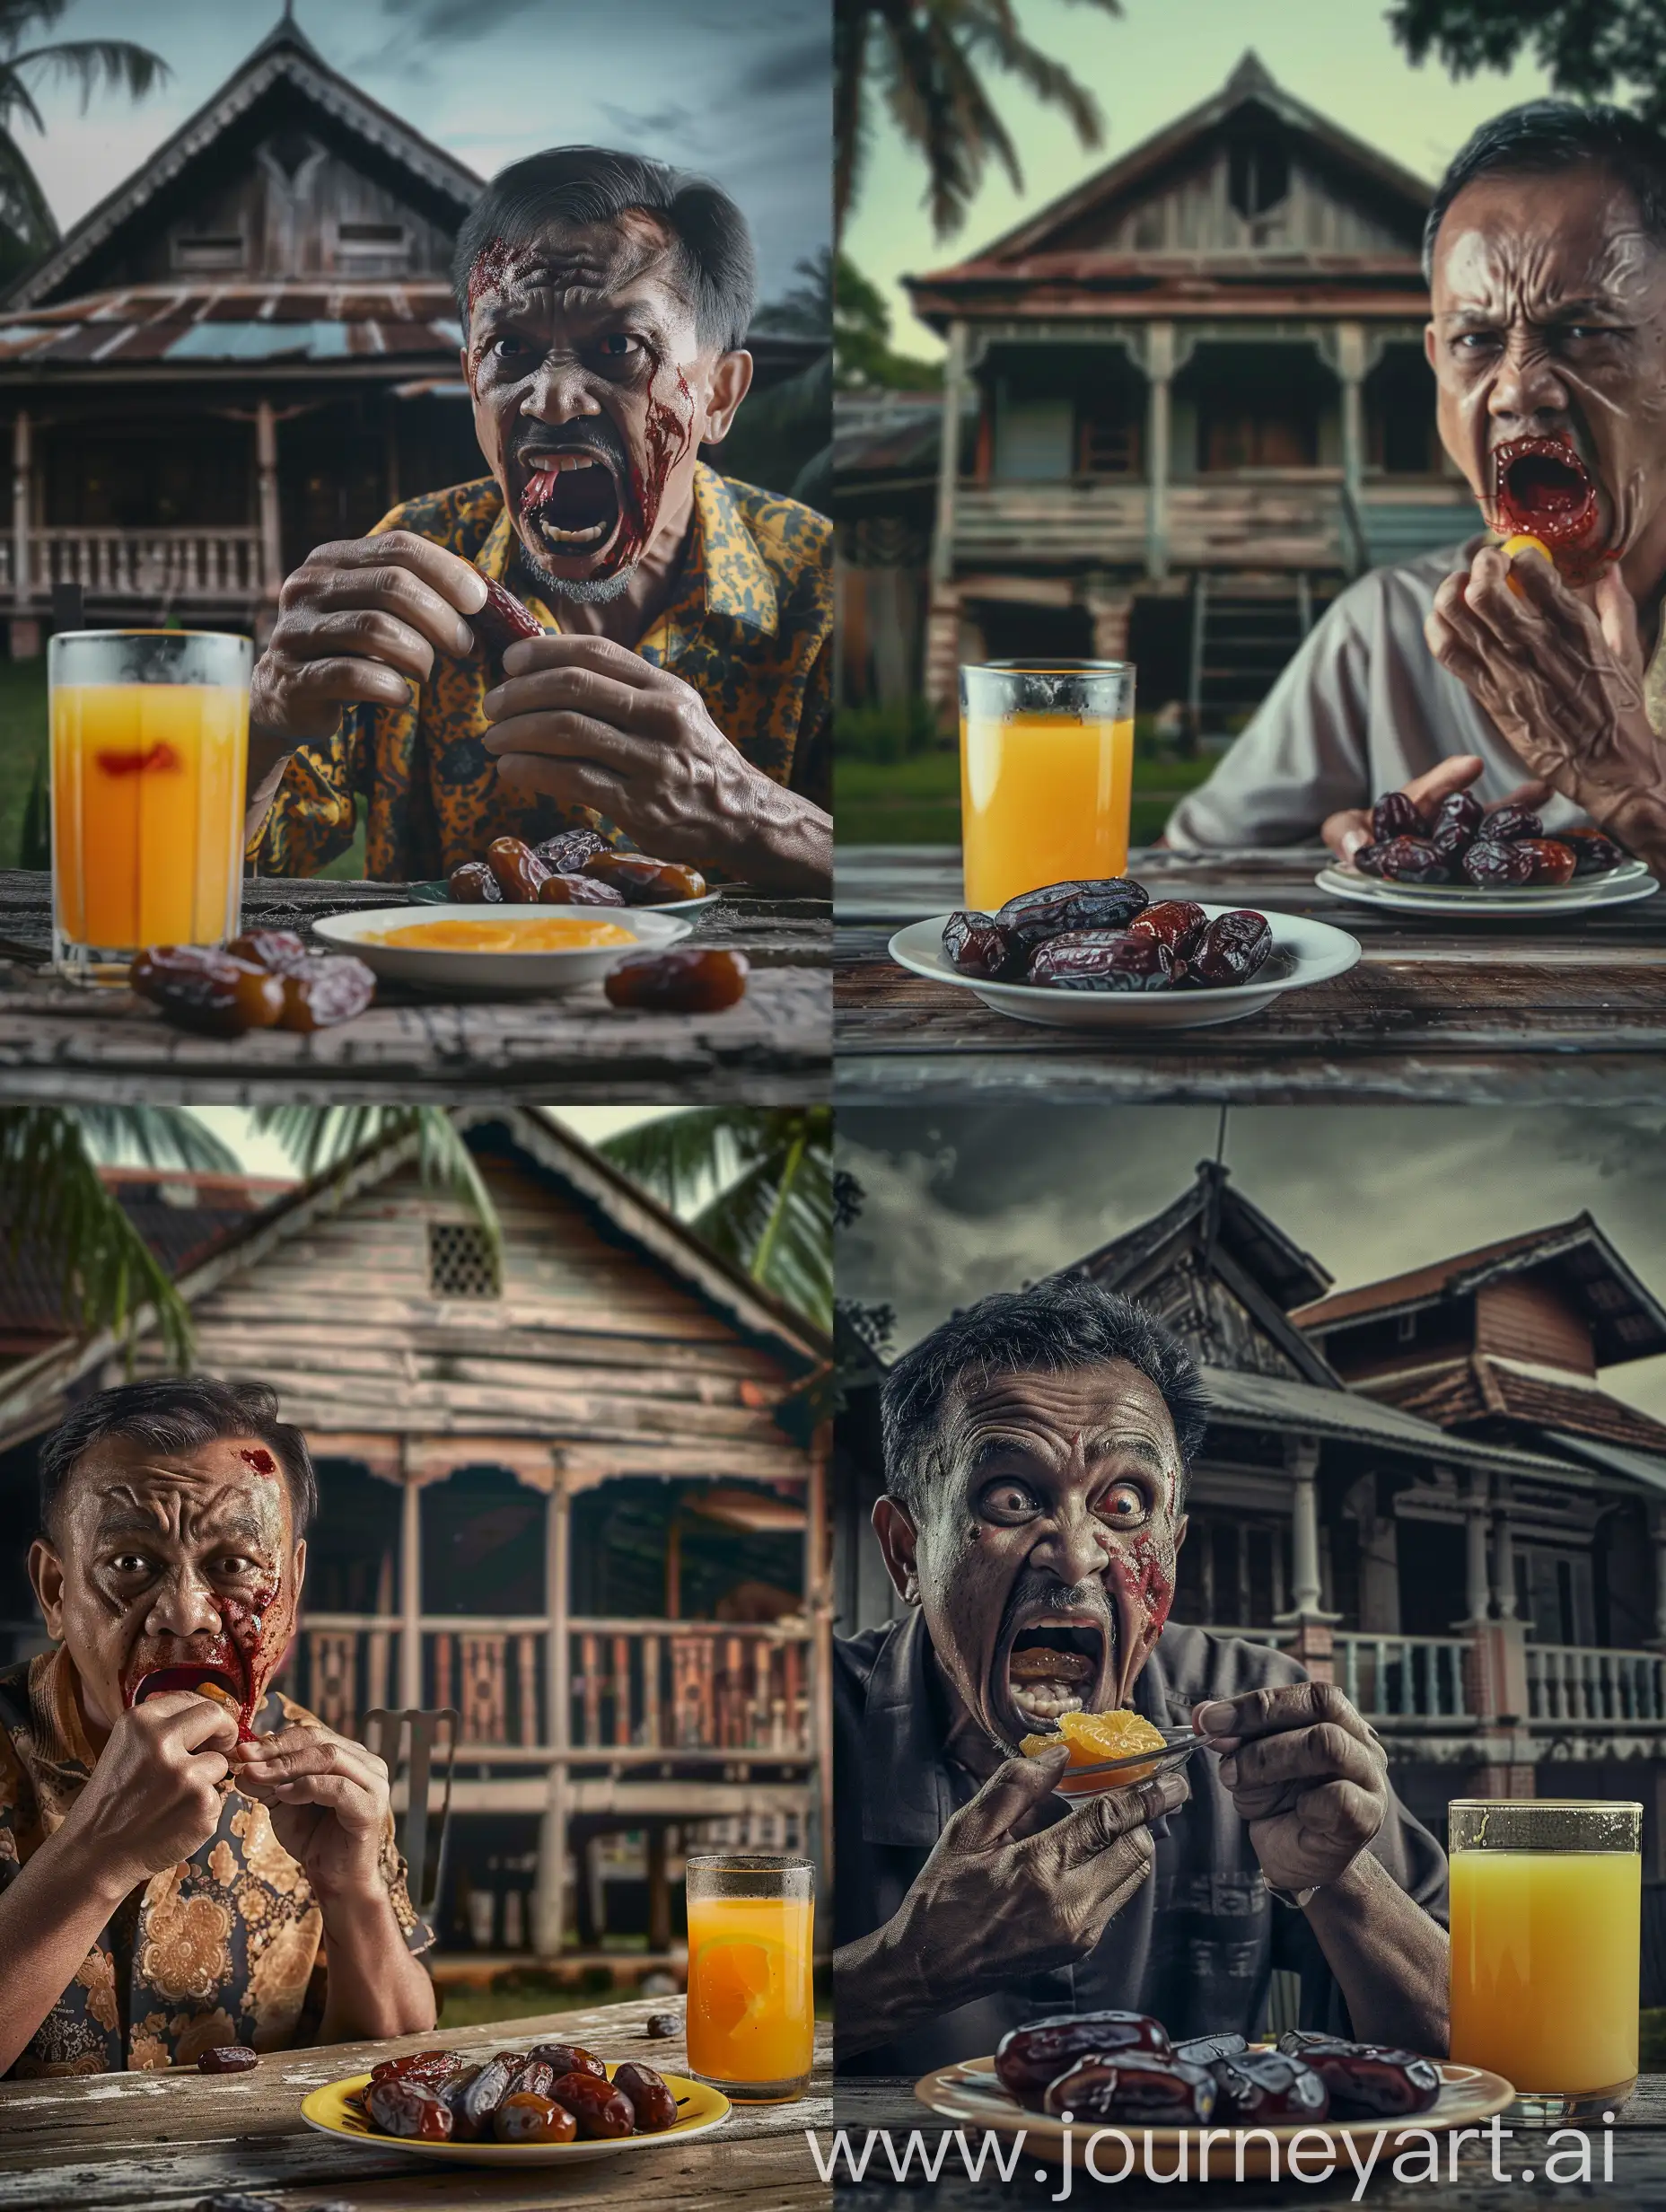 Malay-Man-Eating-Bleeding-Date-with-Orange-Juice-in-Traditional-Setting